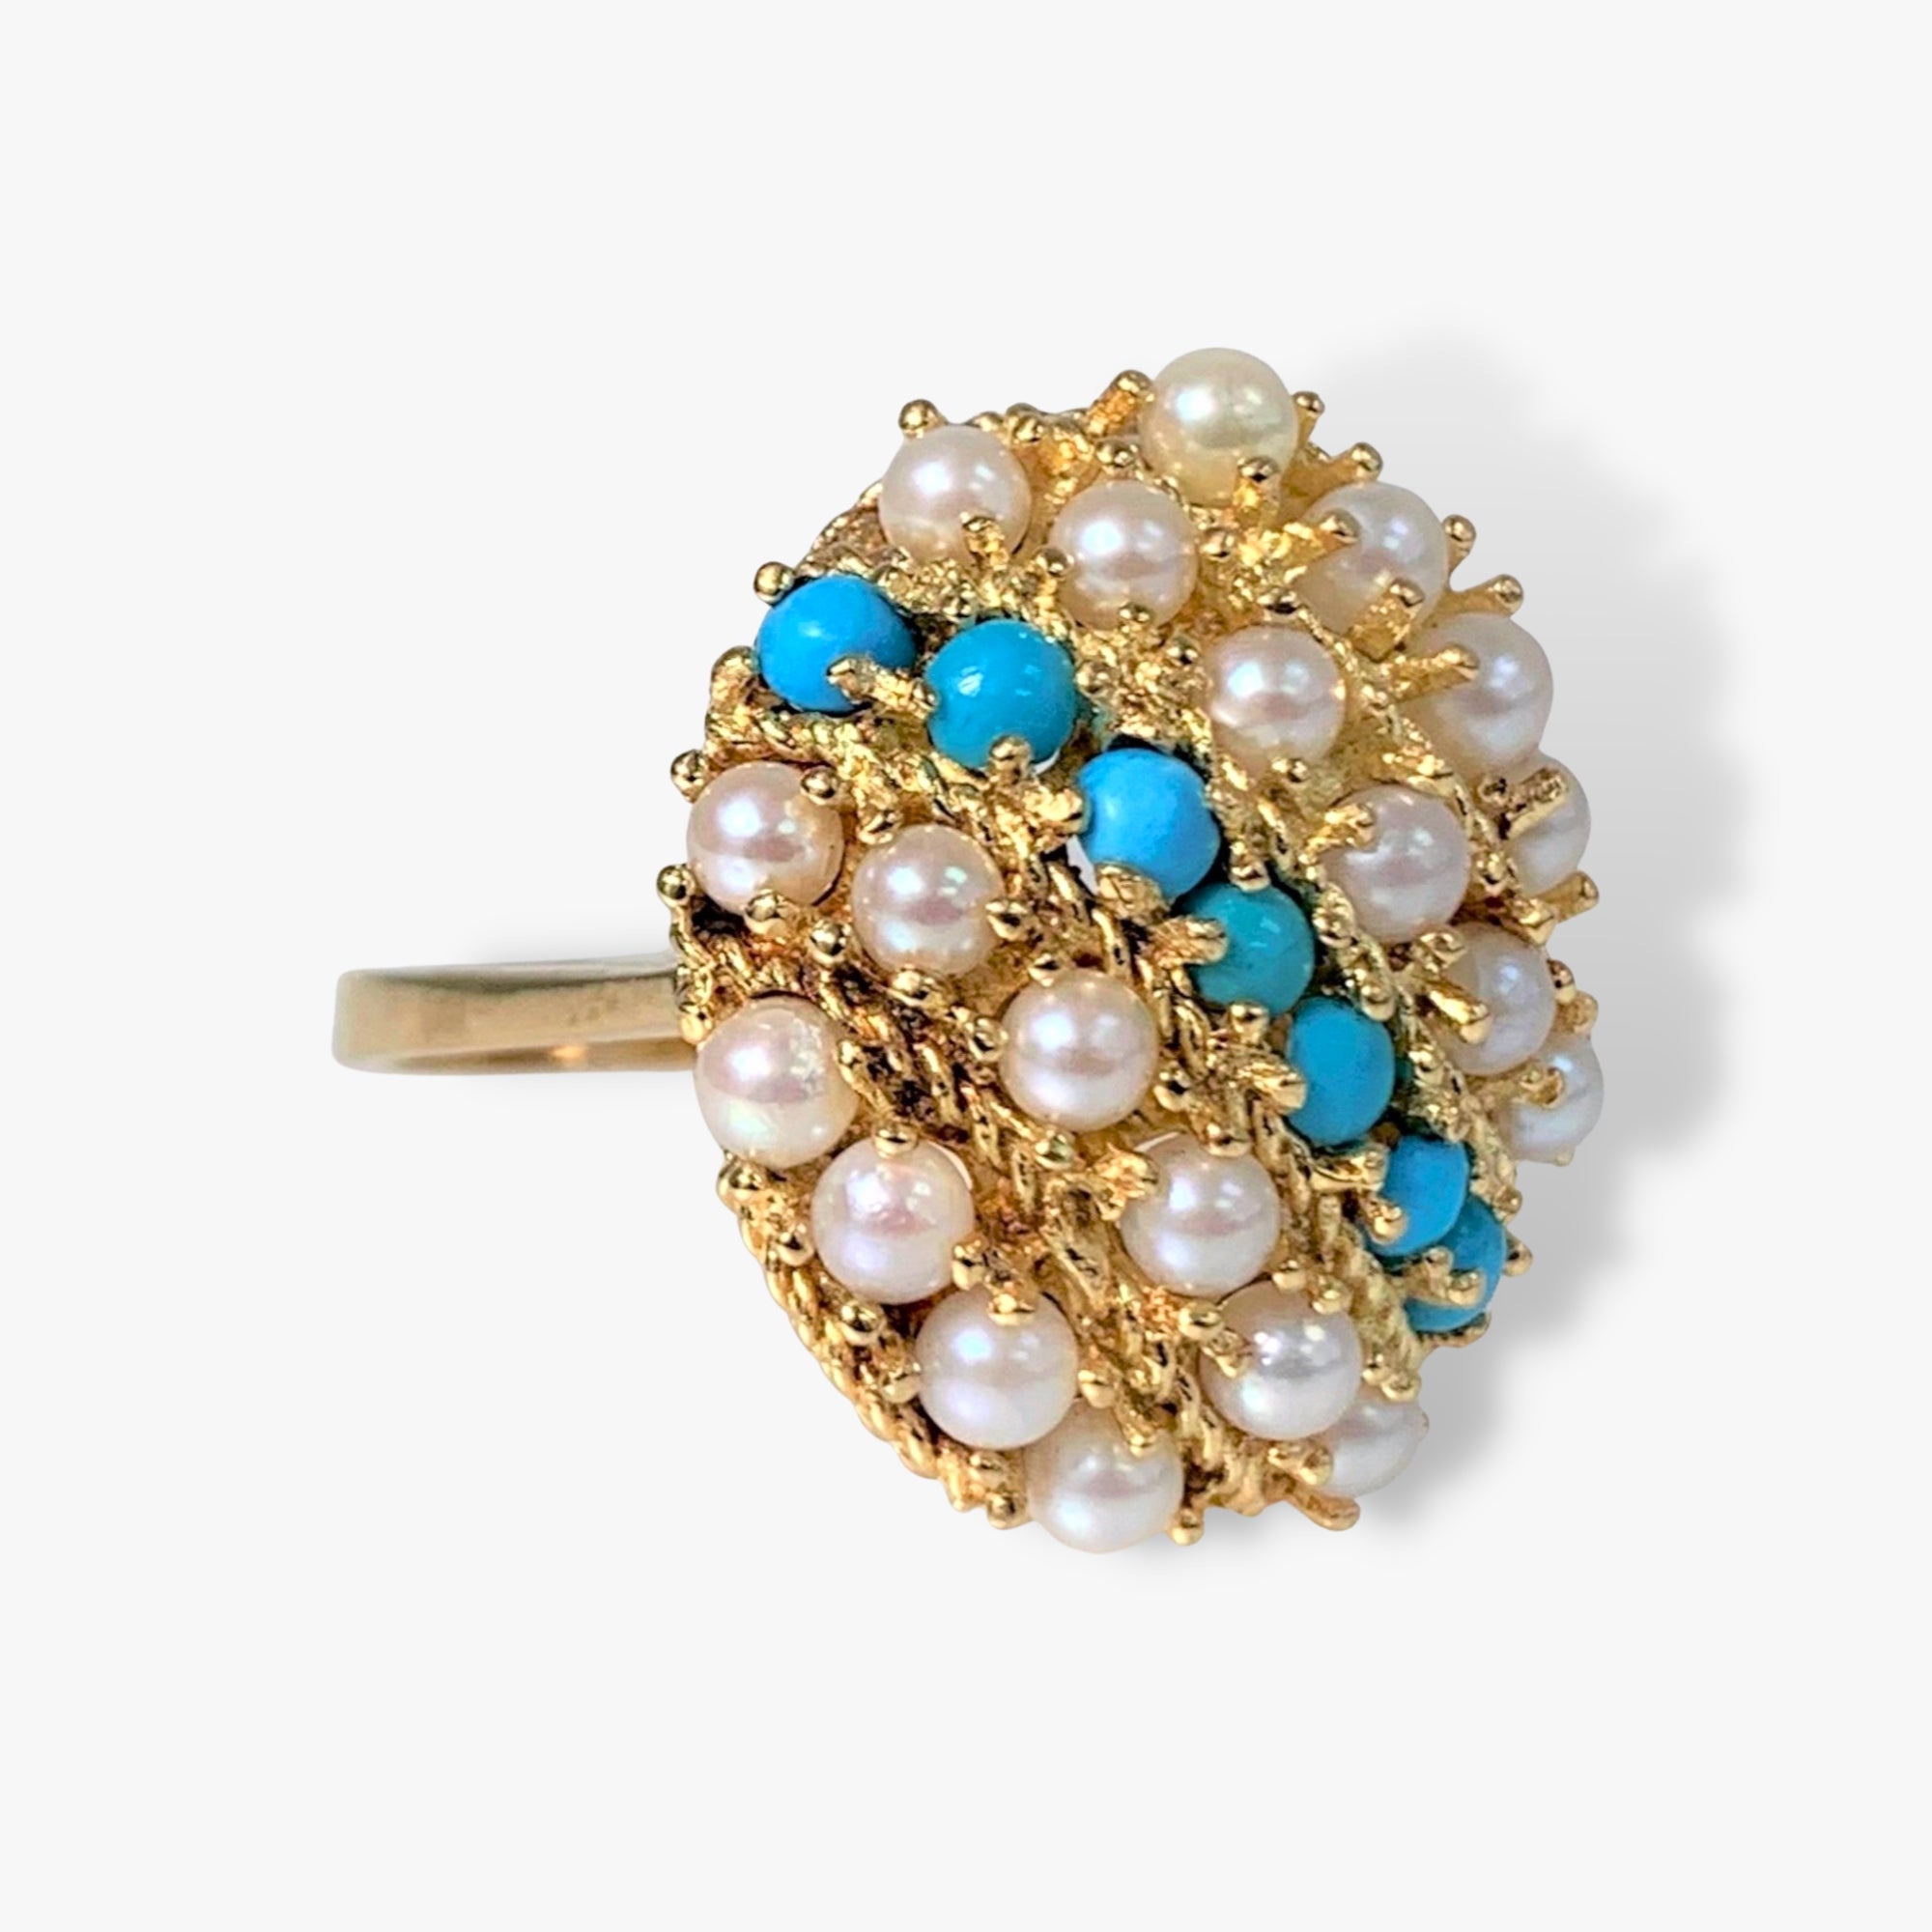 14k Yellow Gold Pearl and Turquoise Vintage Ring Side View